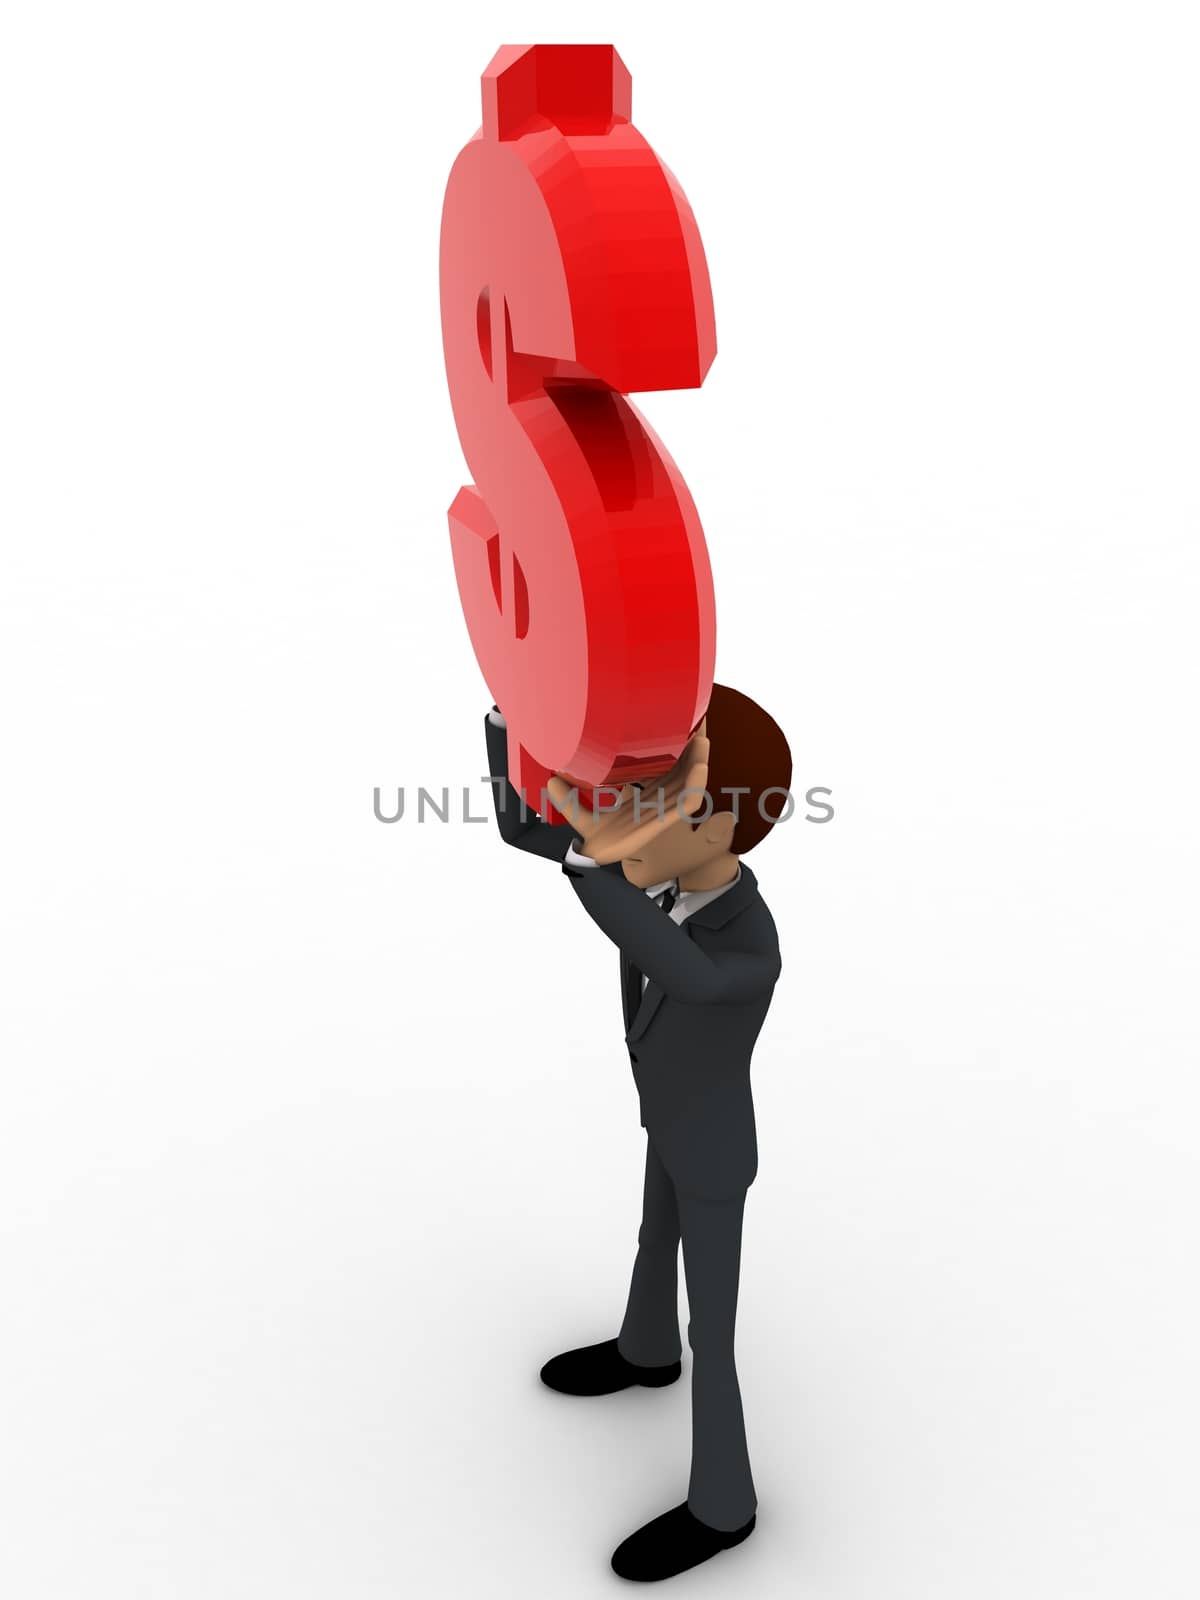 3d man holding red dollar sign in hand concept by touchmenithin@gmail.com